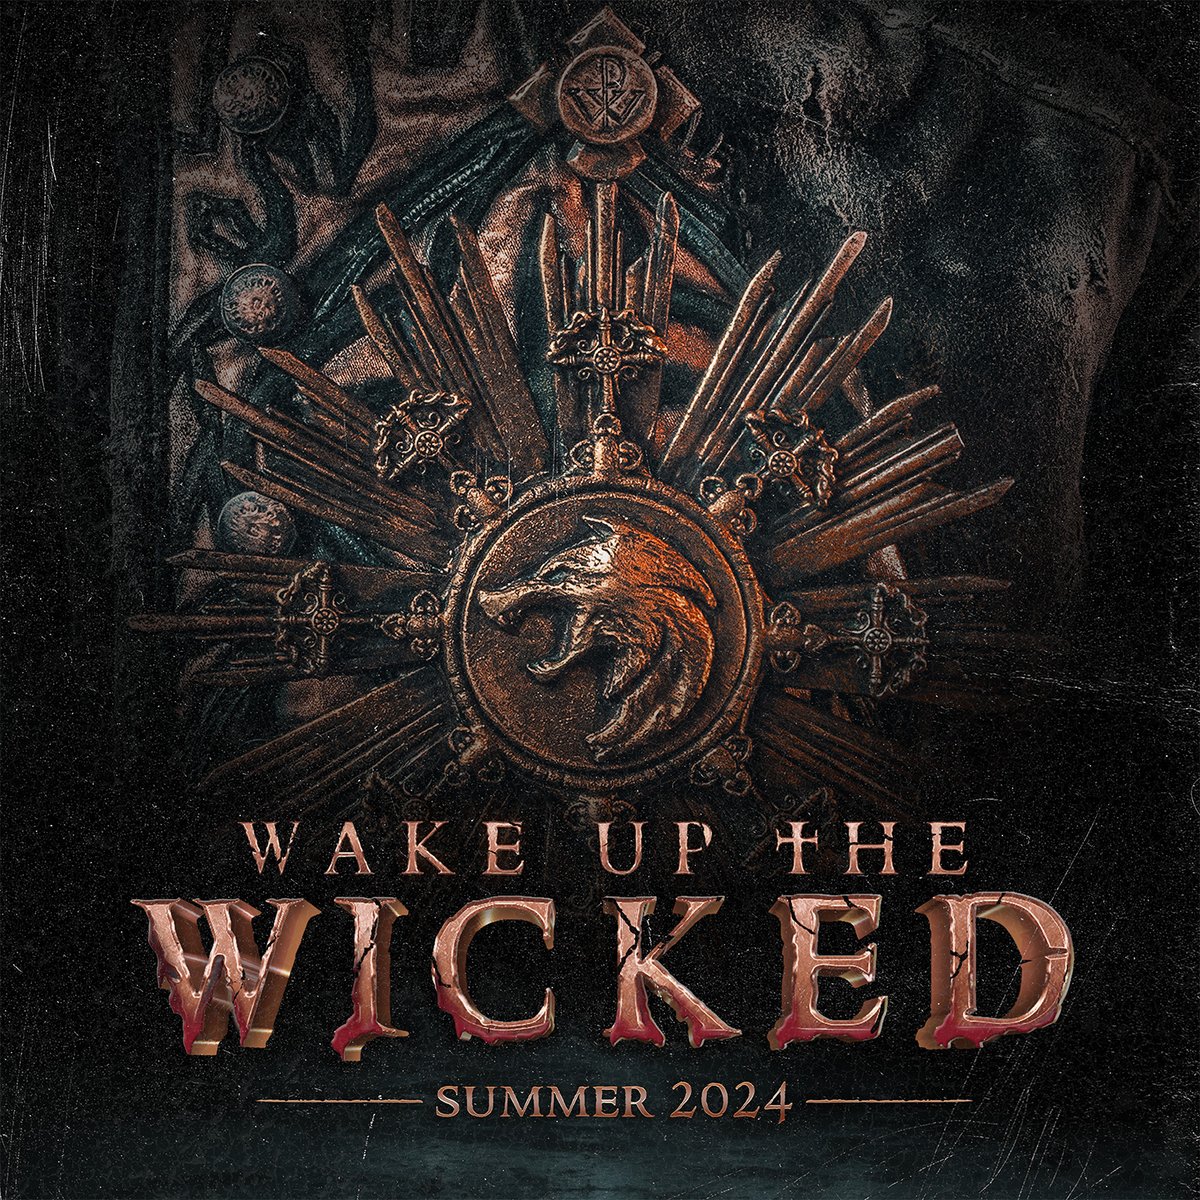 Wake Up The Wicked! This Summer! More Details coming soon. #powerwolf #wakeupthewicked #newalbum #heavymetal